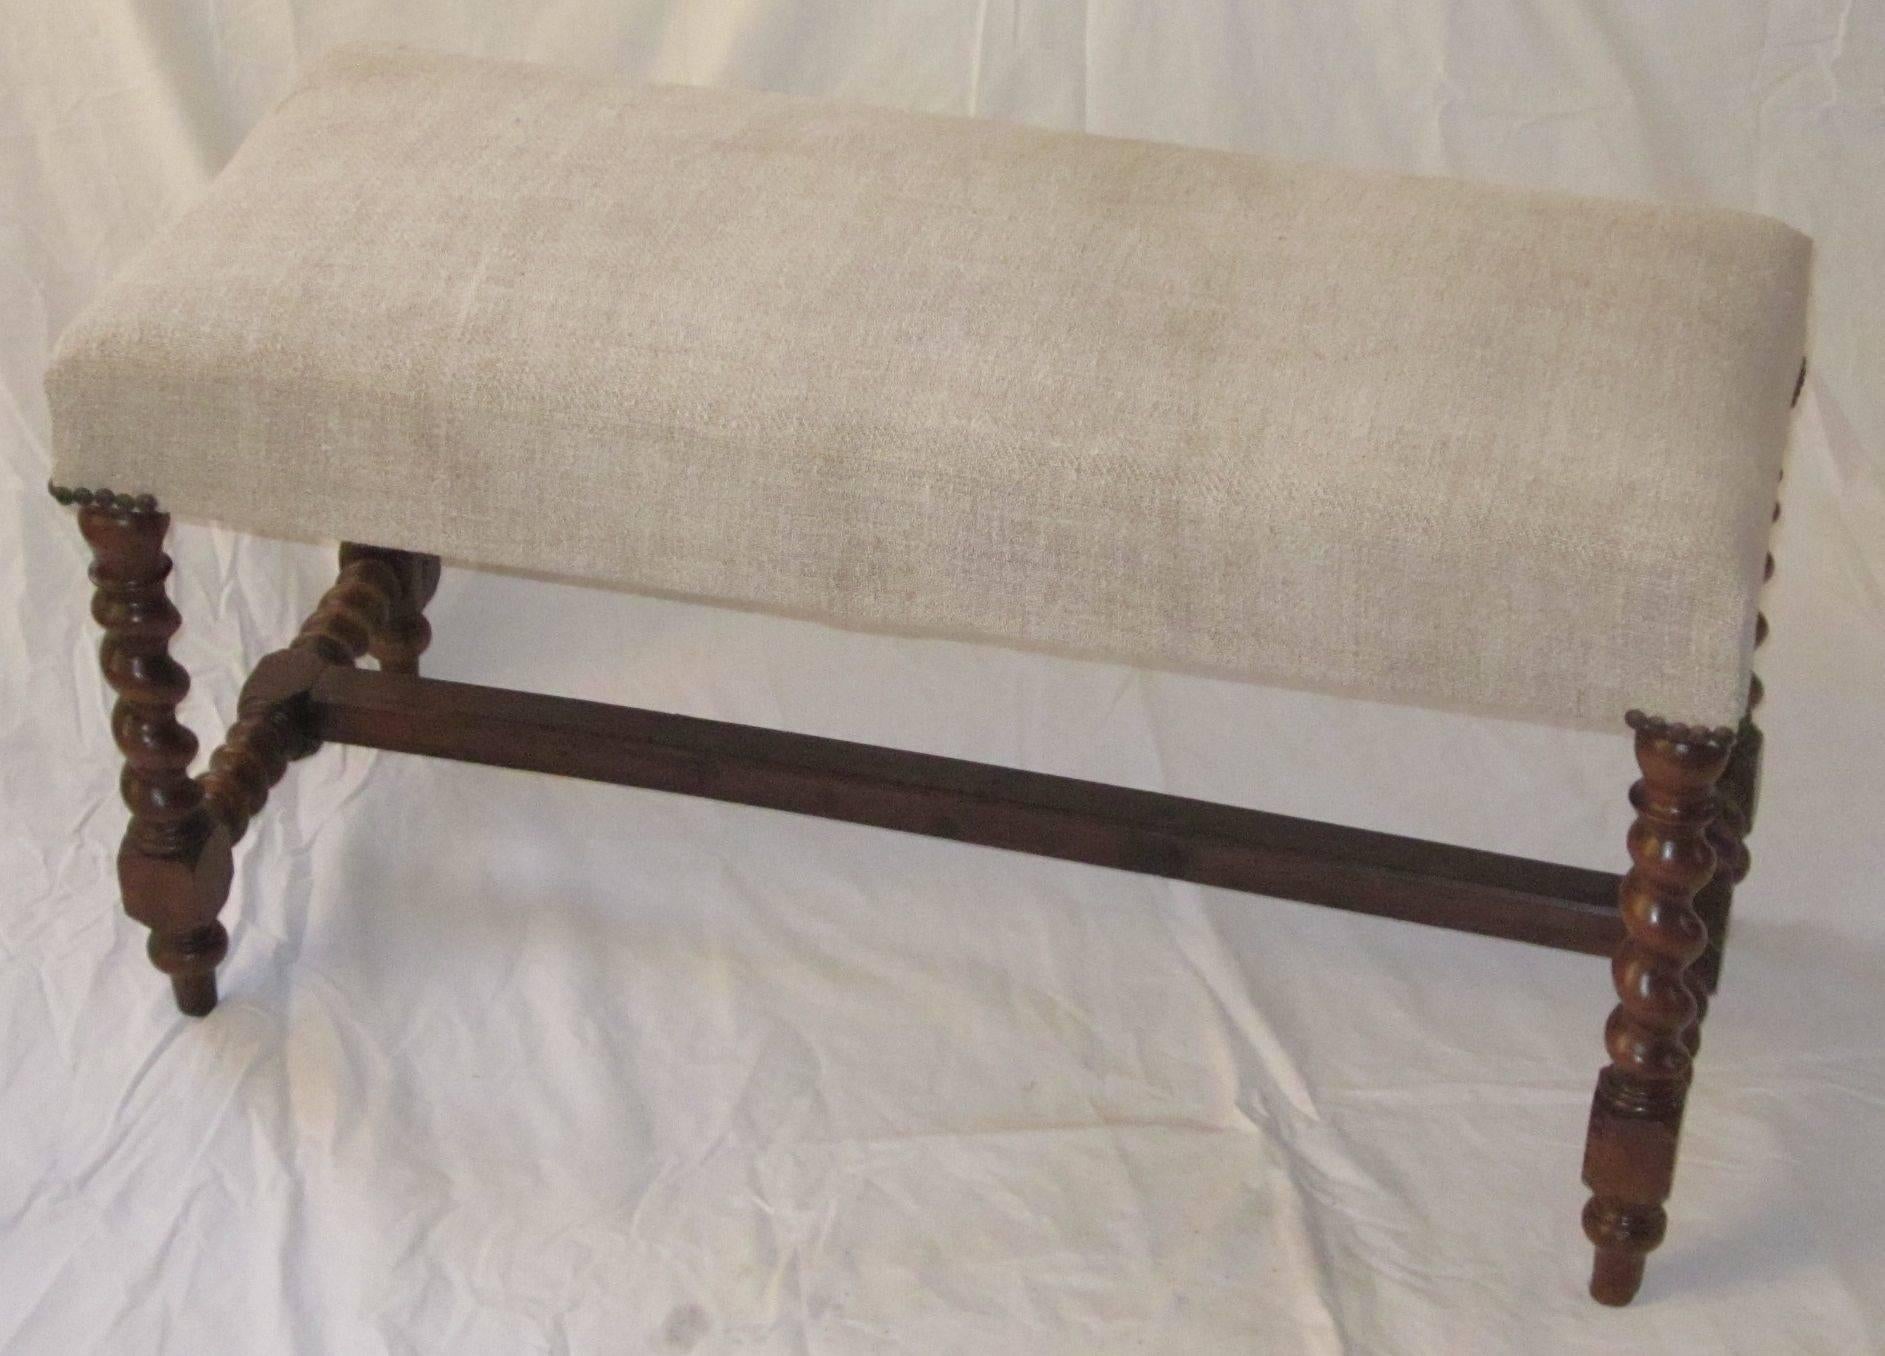 Italian oak bench dated, 1880-1890.
Spindle legs and support bracket.
Upholstered in vintage Belgian linen.